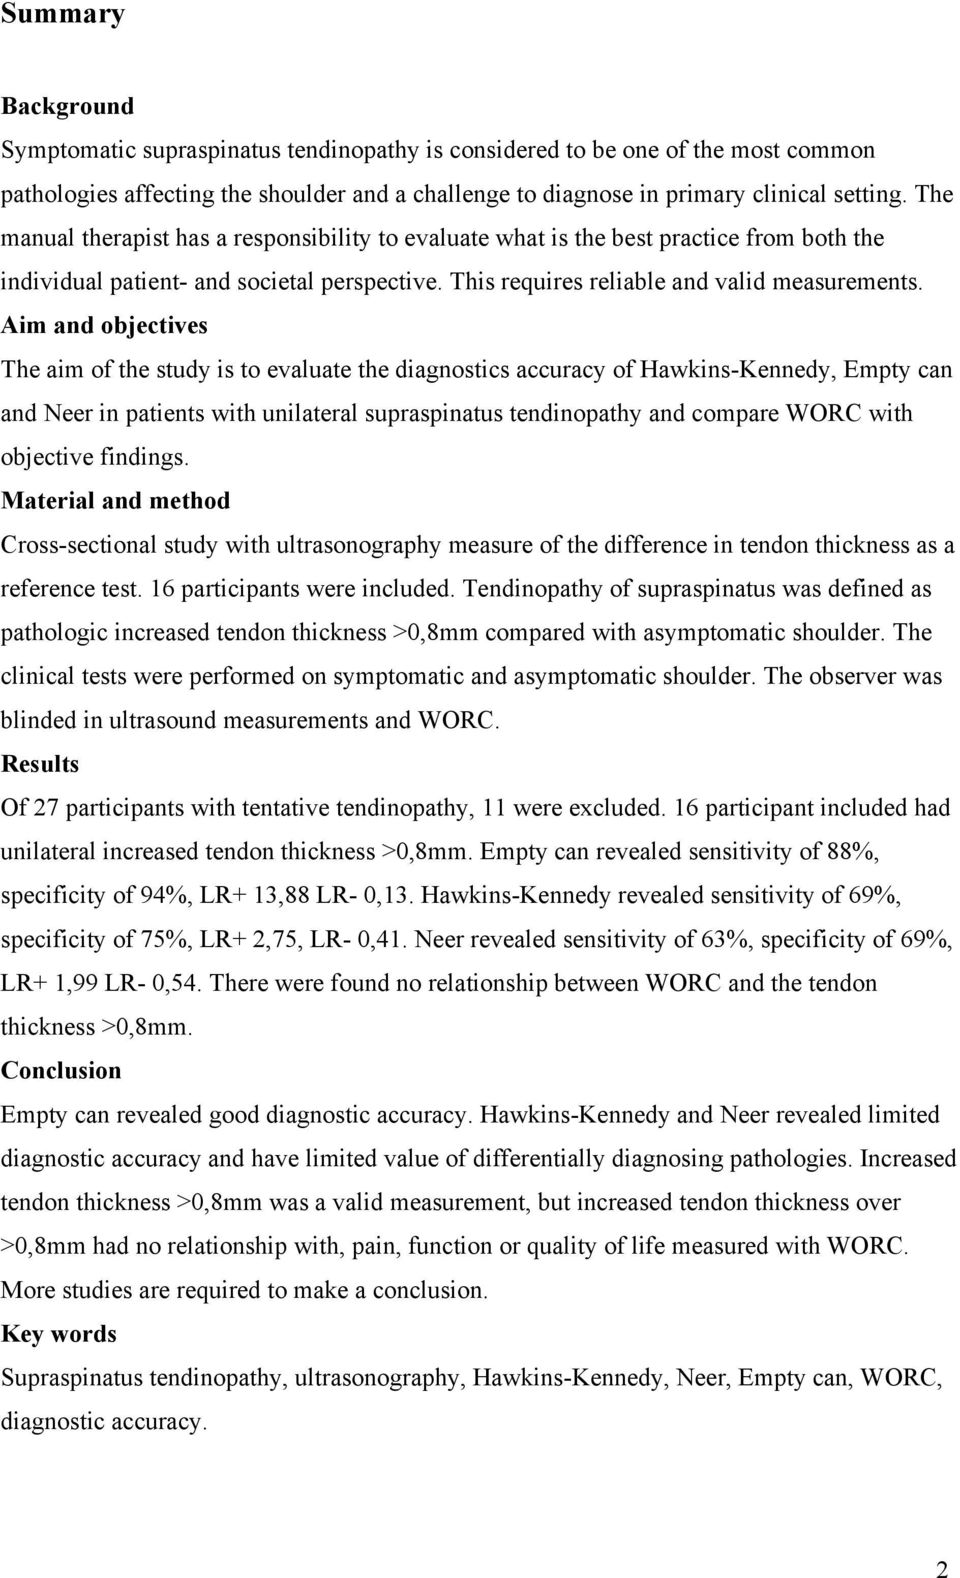 Aim and objectives The aim of the study is to evaluate the diagnostics accuracy of Hawkins-Kennedy, Empty can and Neer in patients with unilateral supraspinatus tendinopathy and compare WORC with